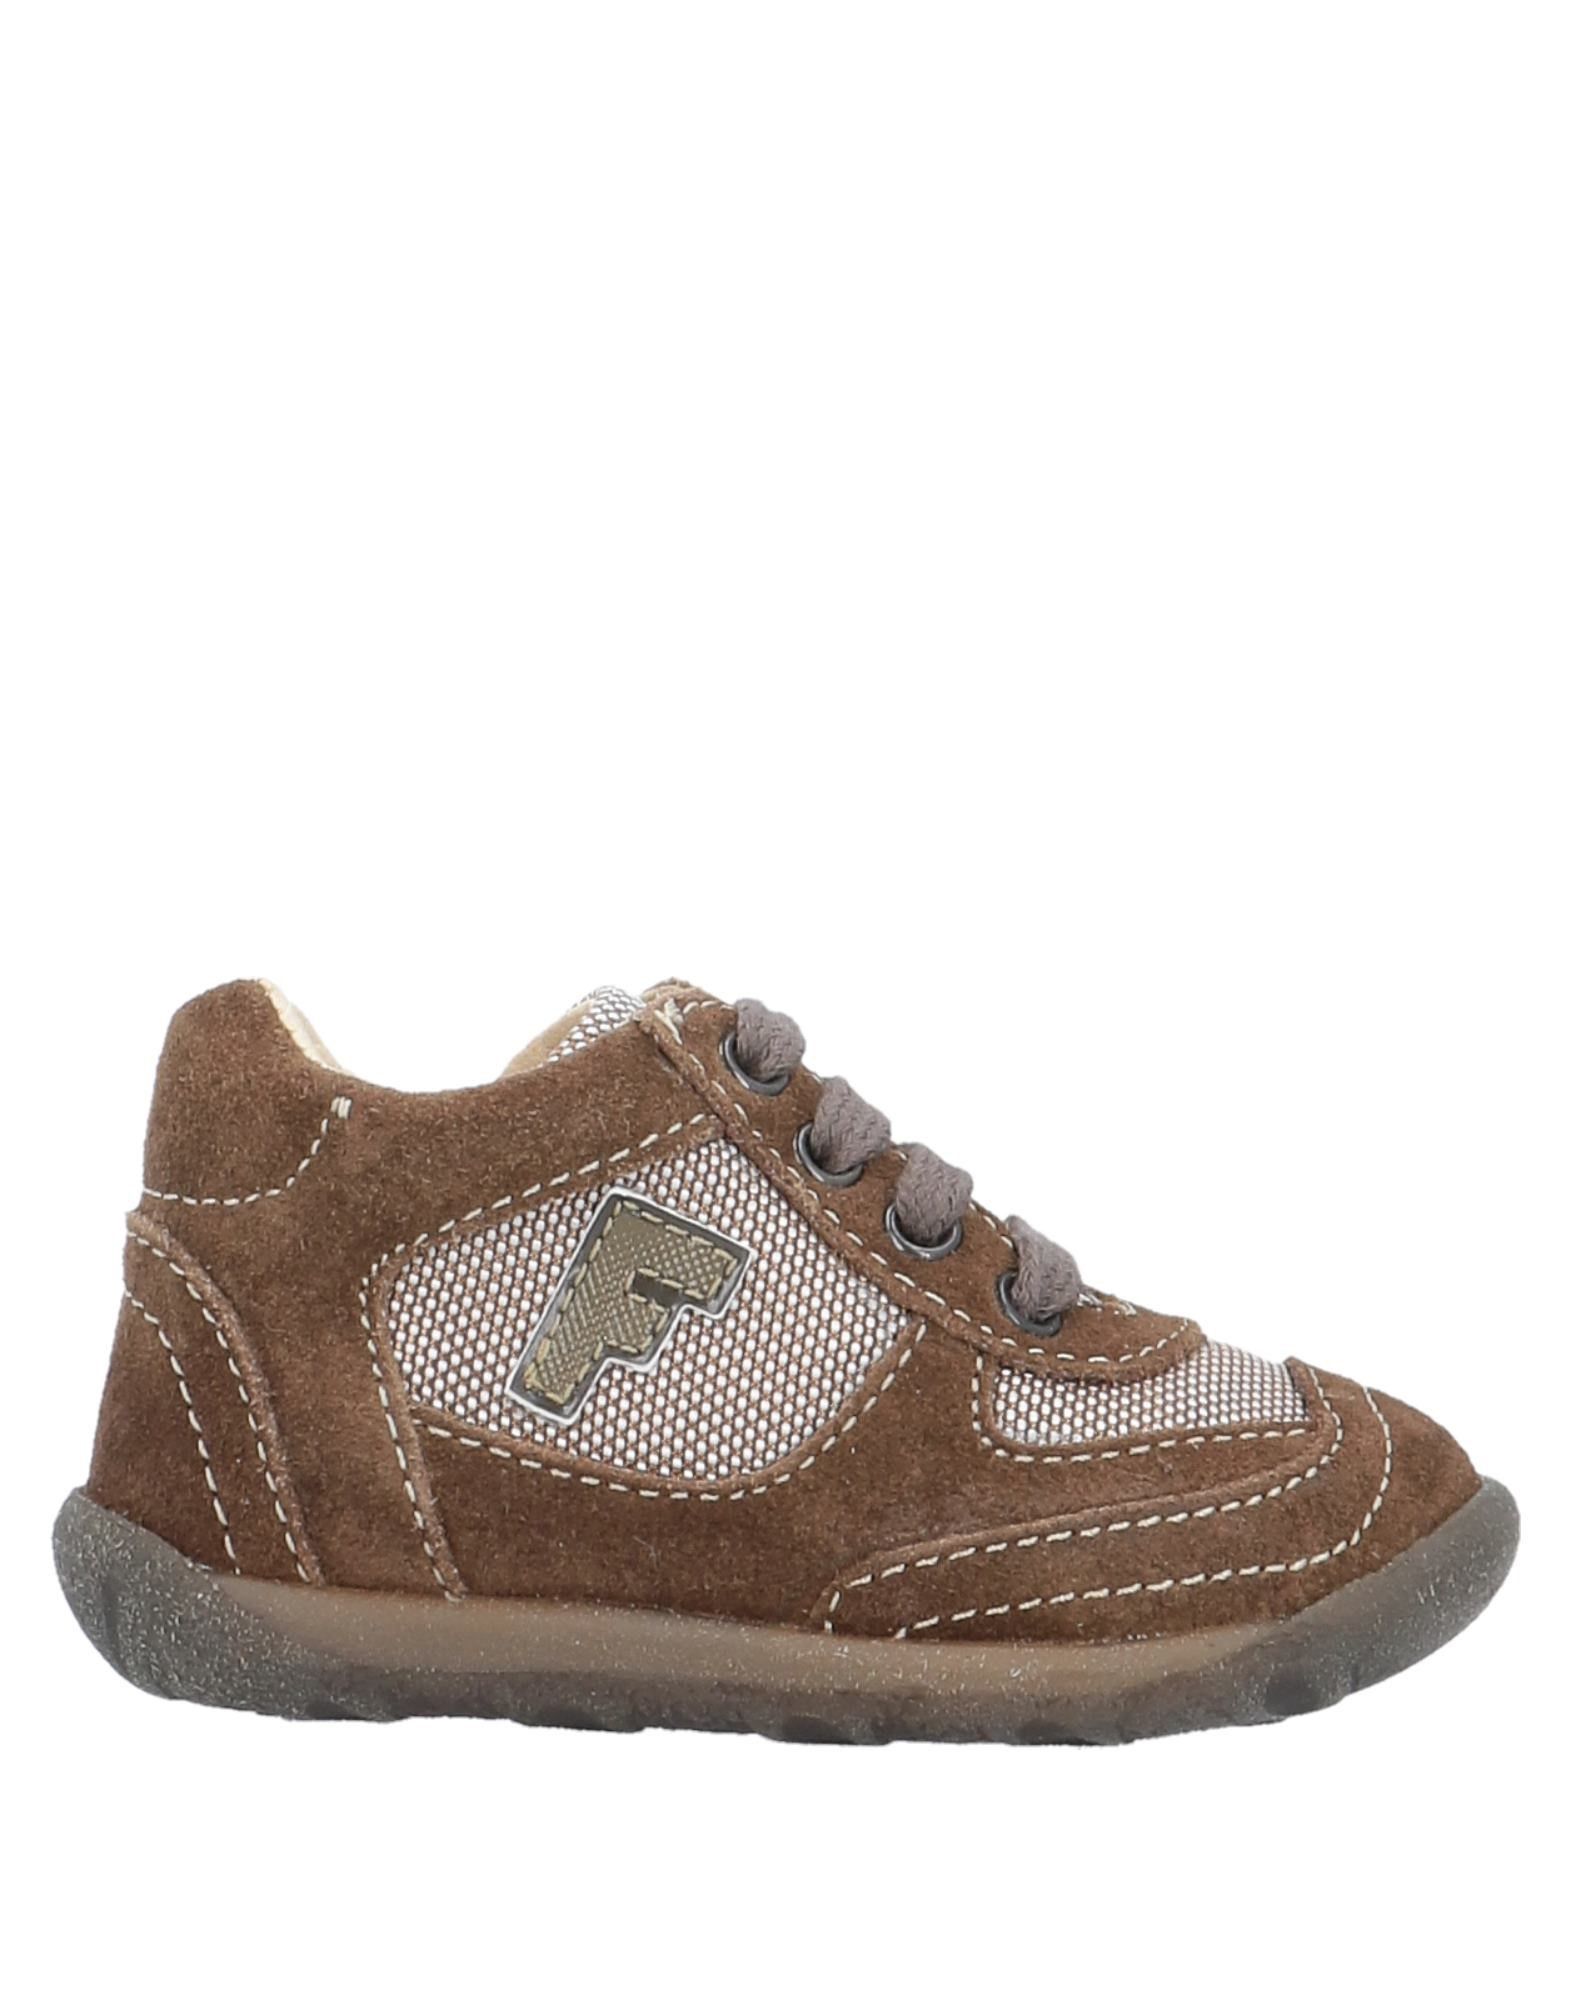 FALCOTTO by NATURINO Sneakers Kinder Mittelbraun von FALCOTTO by NATURINO